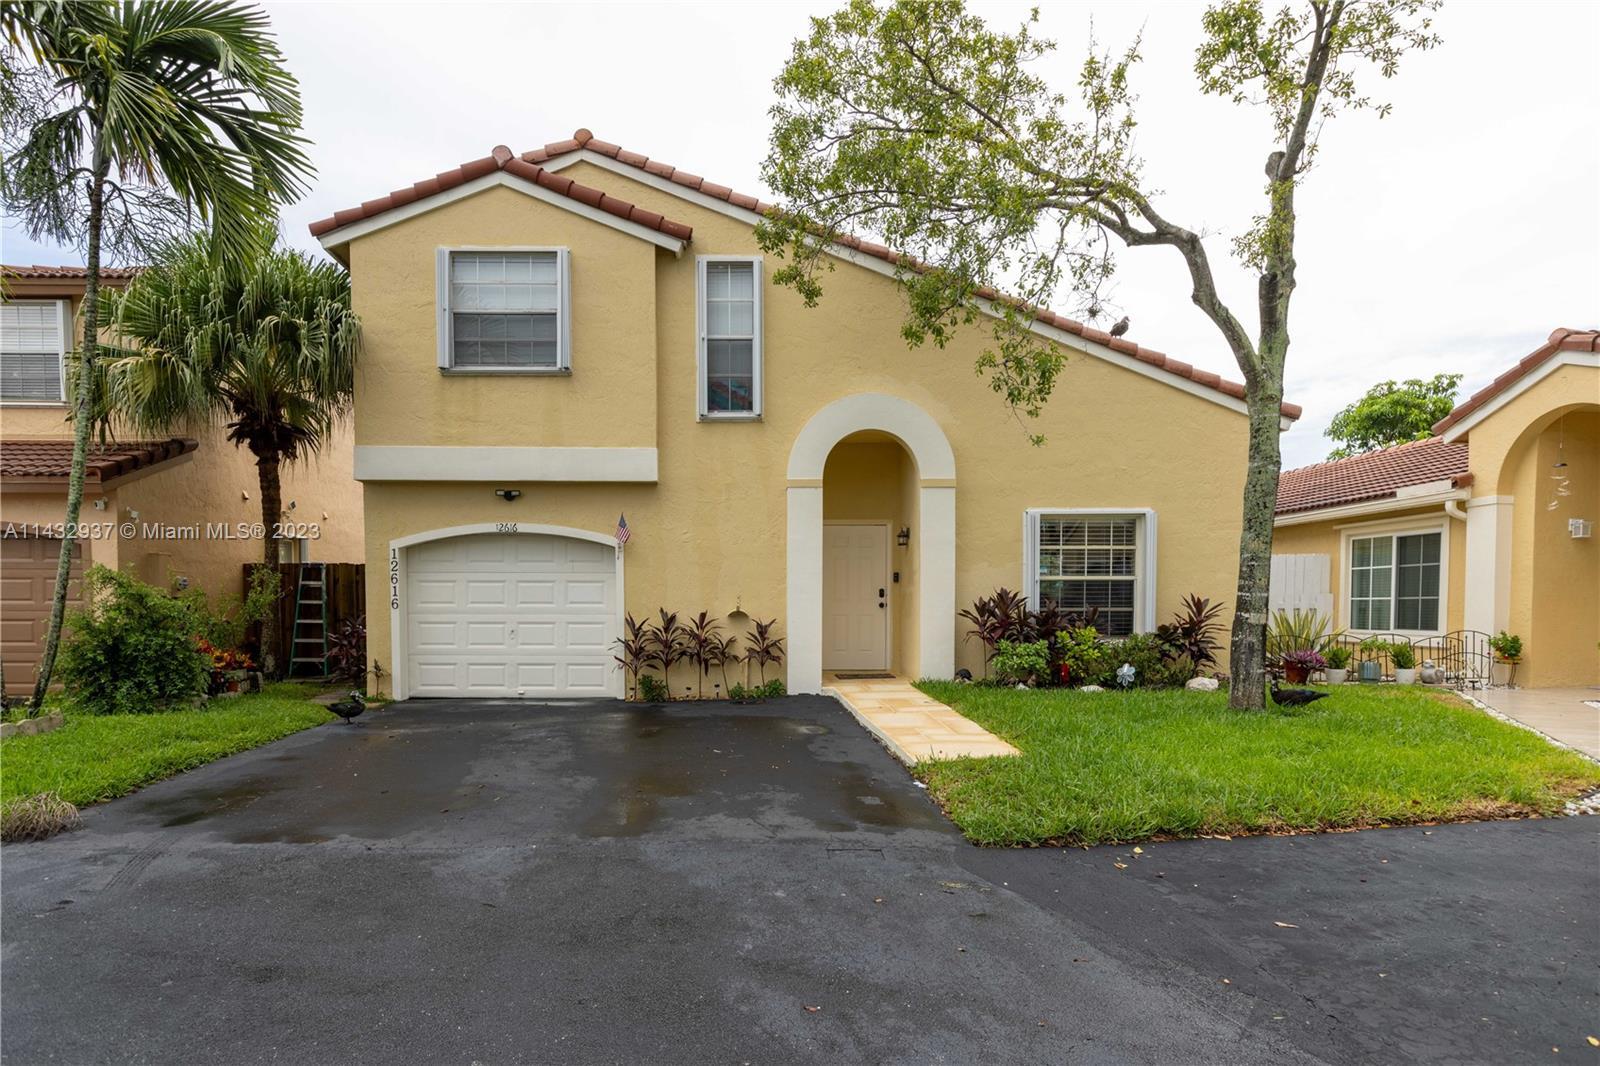 Photo of 12616 NW 13th St in Sunrise, FL